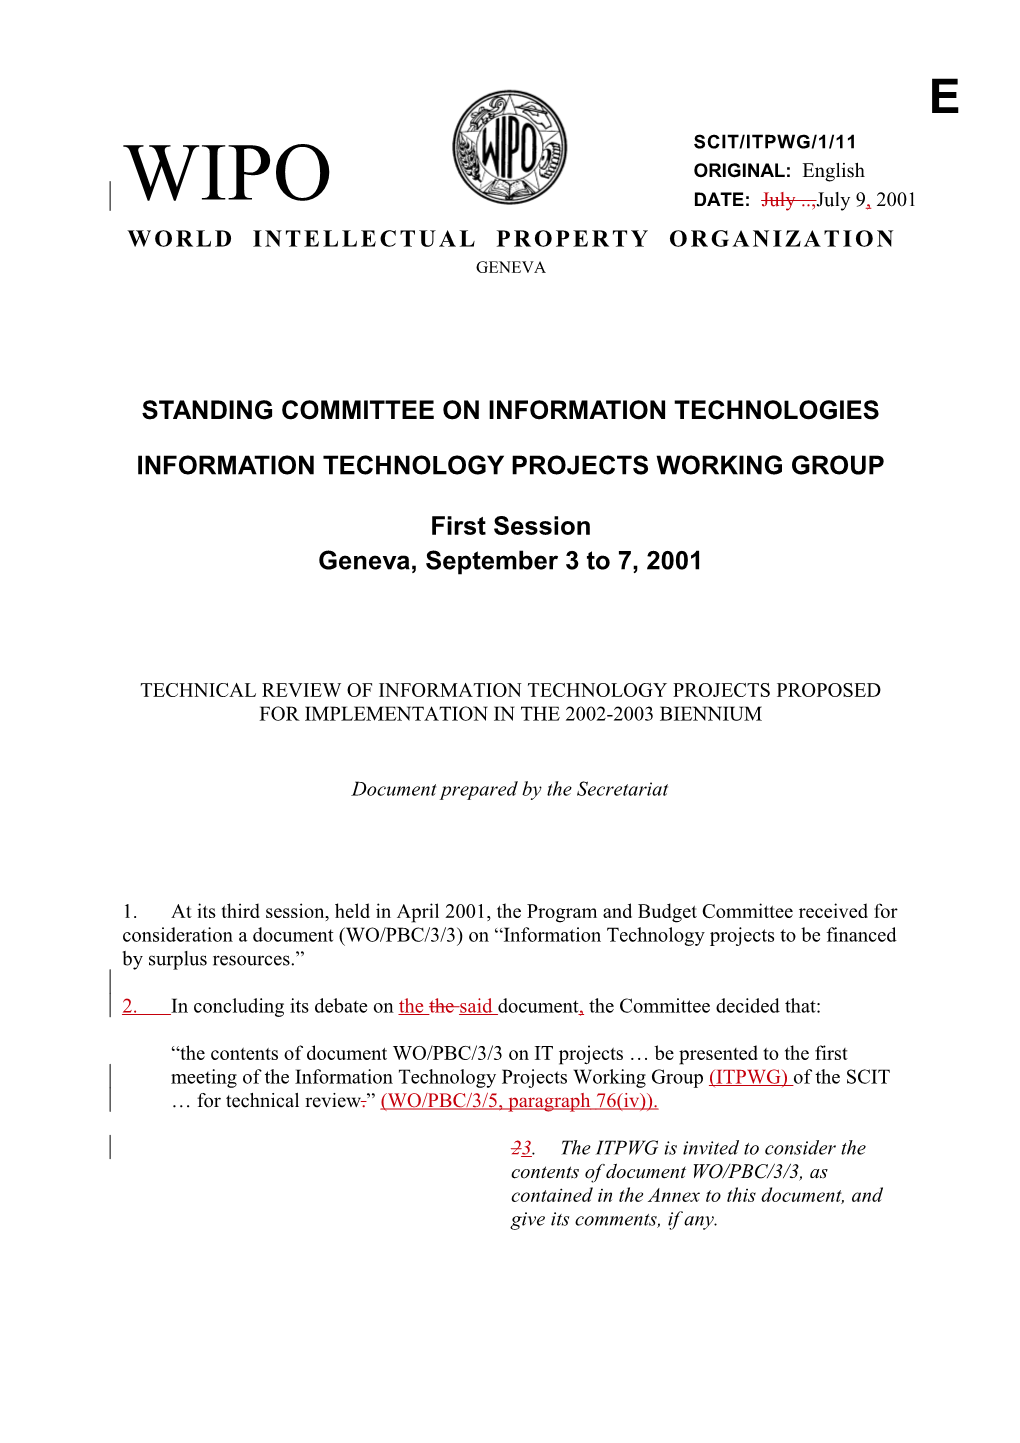 SCIT/ITPWG/1/11: Technical Review of Information Technology Projects Proposed for Implementation